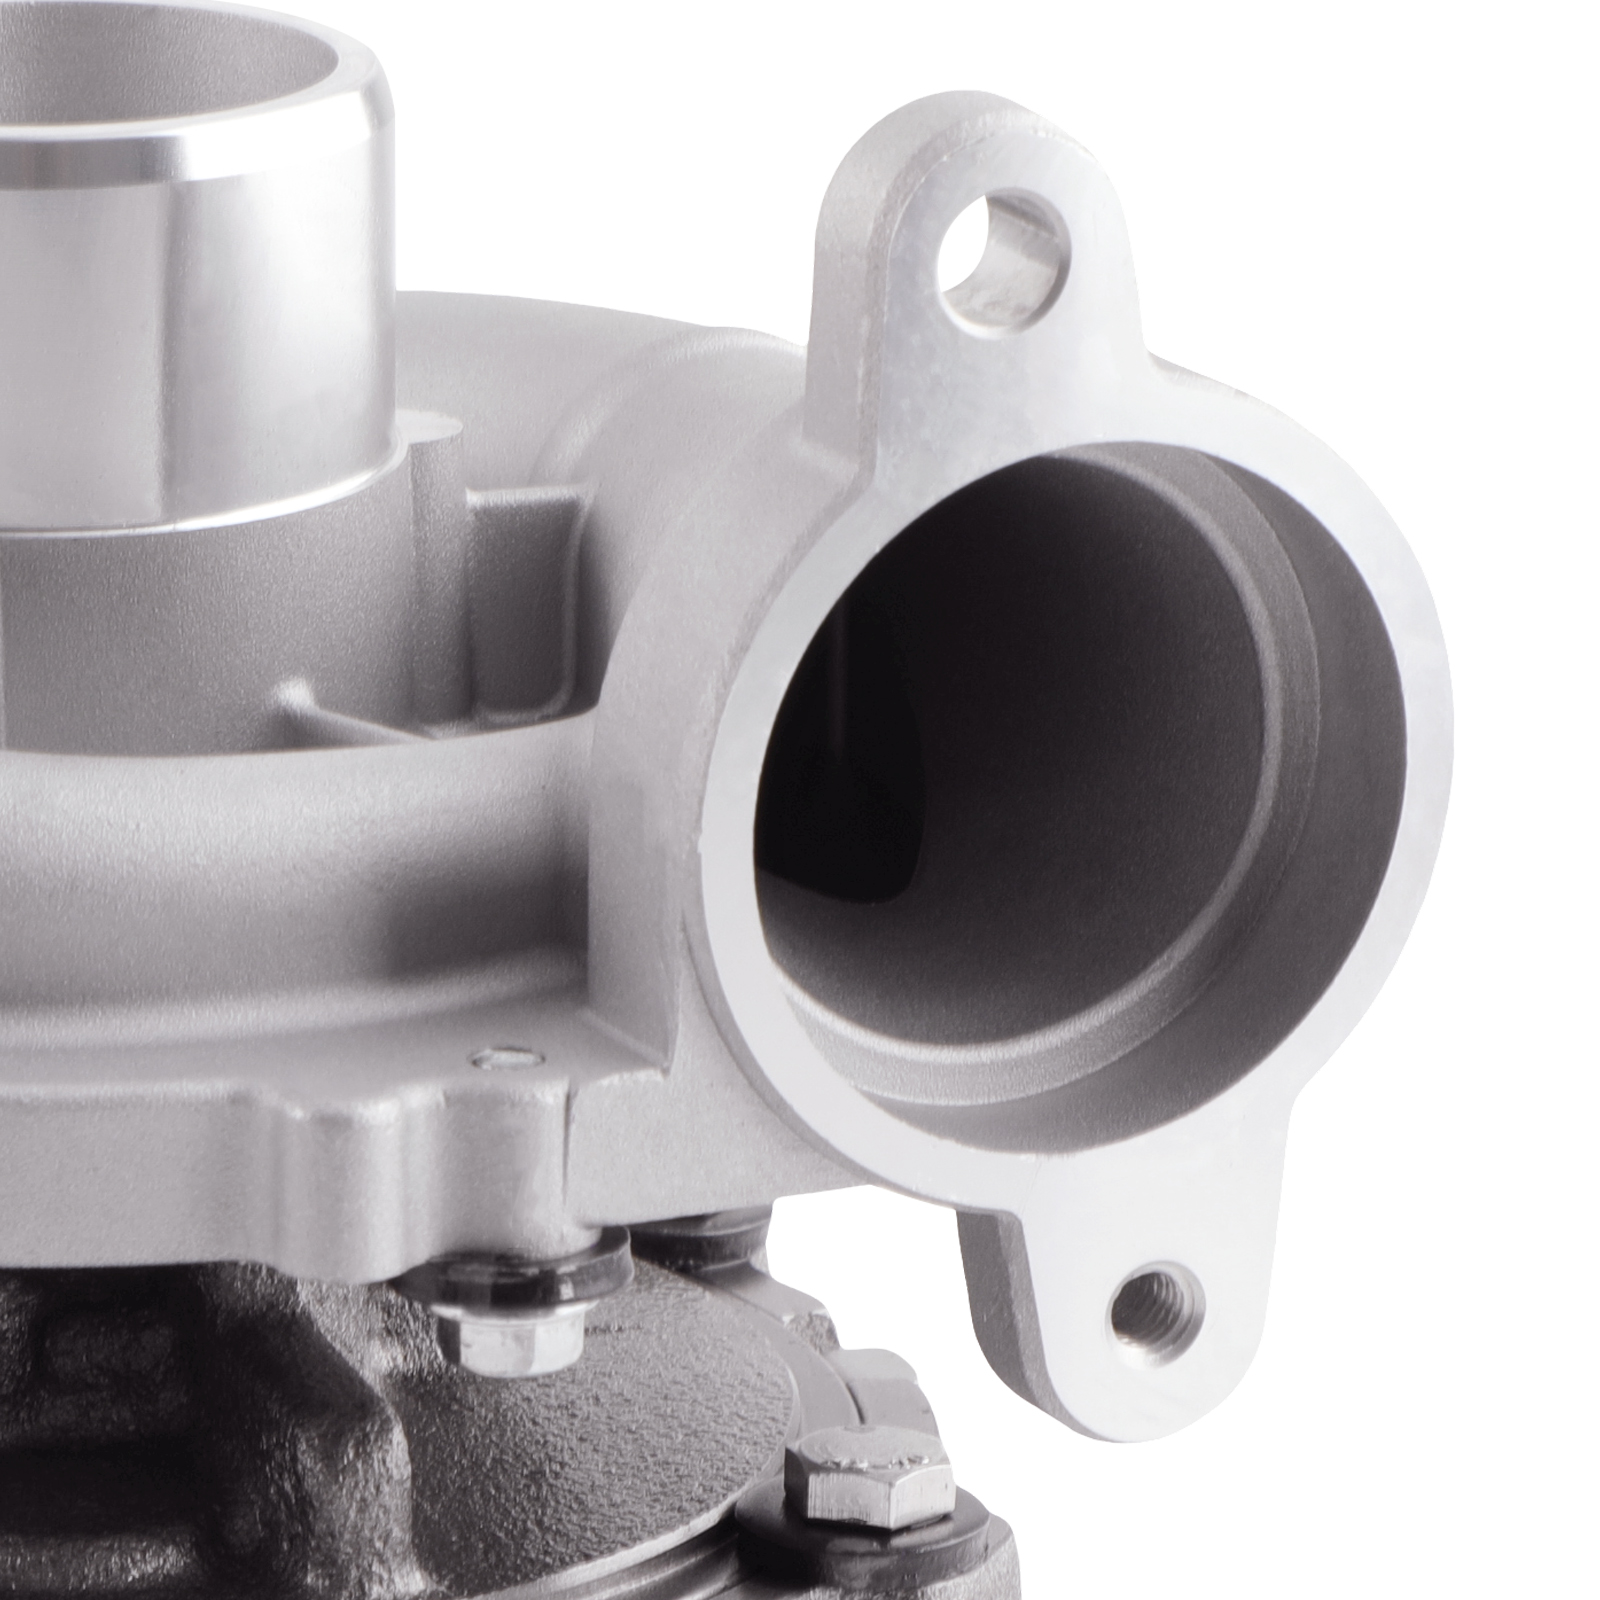 new 1.6 HDI TDCI 109 PS 80KW Turbocharger For Ford Citroen Peugeot Volvo Mazda